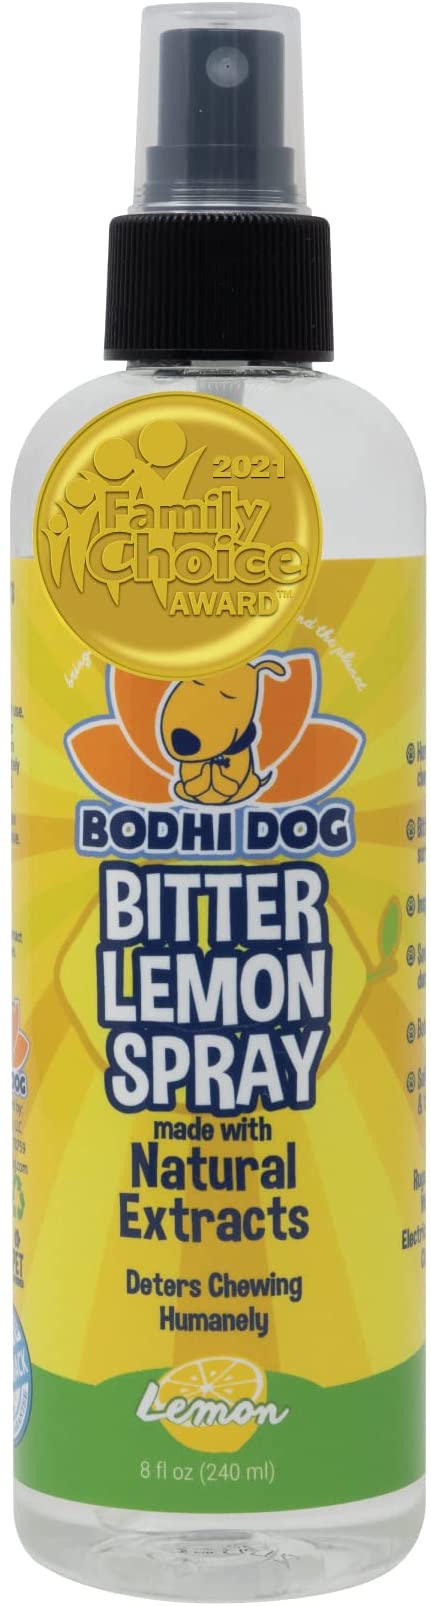 Bodhi Dog Bitter Lemon Spray | Stop Biting and Chewing for Puppies Older Dogs and Cats | Anti Chew Spray Puppy Kitten Training Treatment | 100% Non Toxic | Made in USA